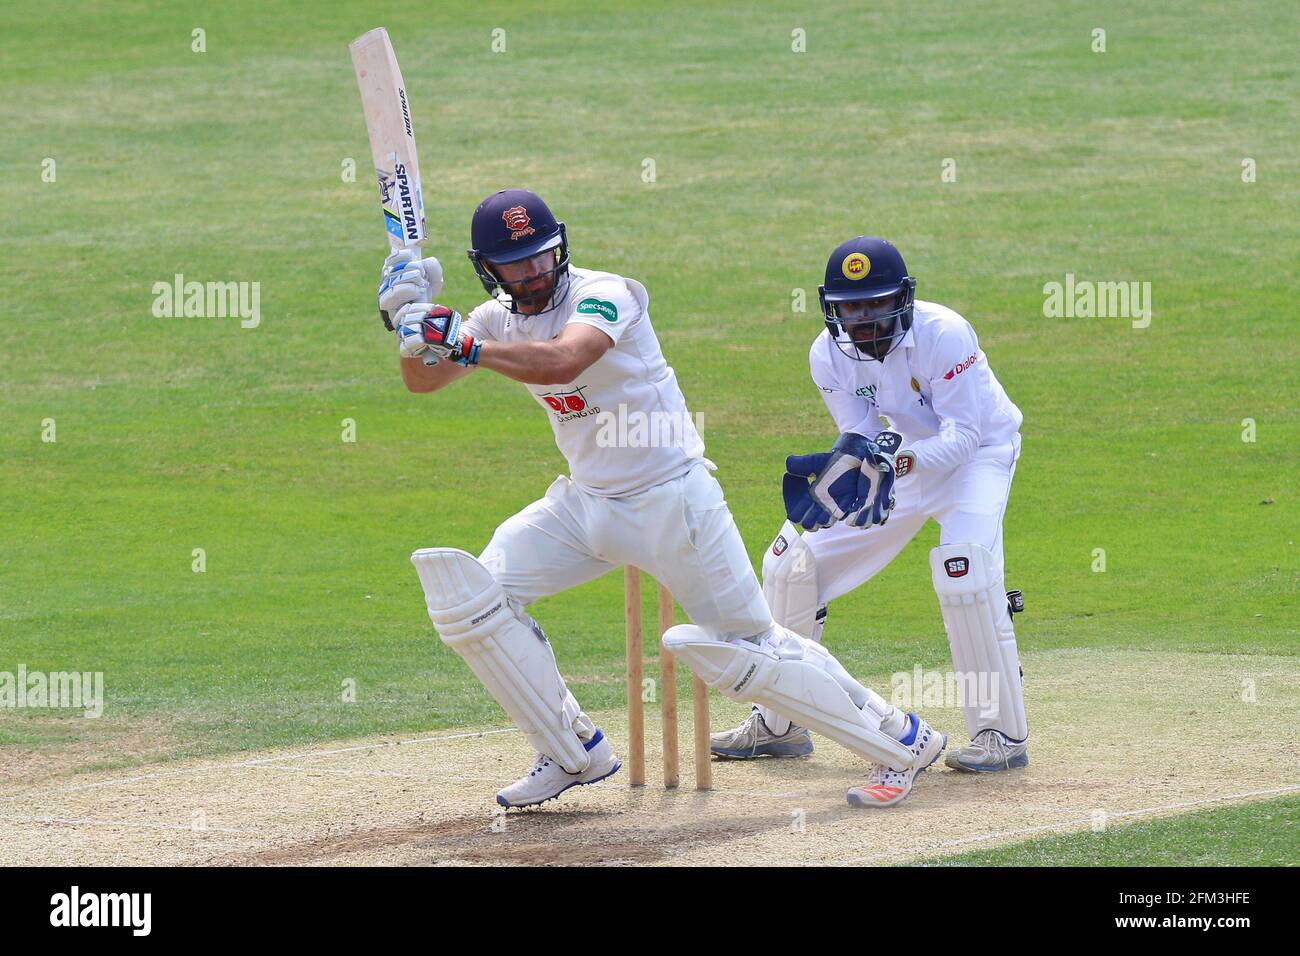 Jaik Micklebugh in batting action for Essex as Dinesh Chandimal of Sri Lanka looks on from behind the stumps during Essex CCC vs Sri Lanka, Tourist Ma Stock Photo